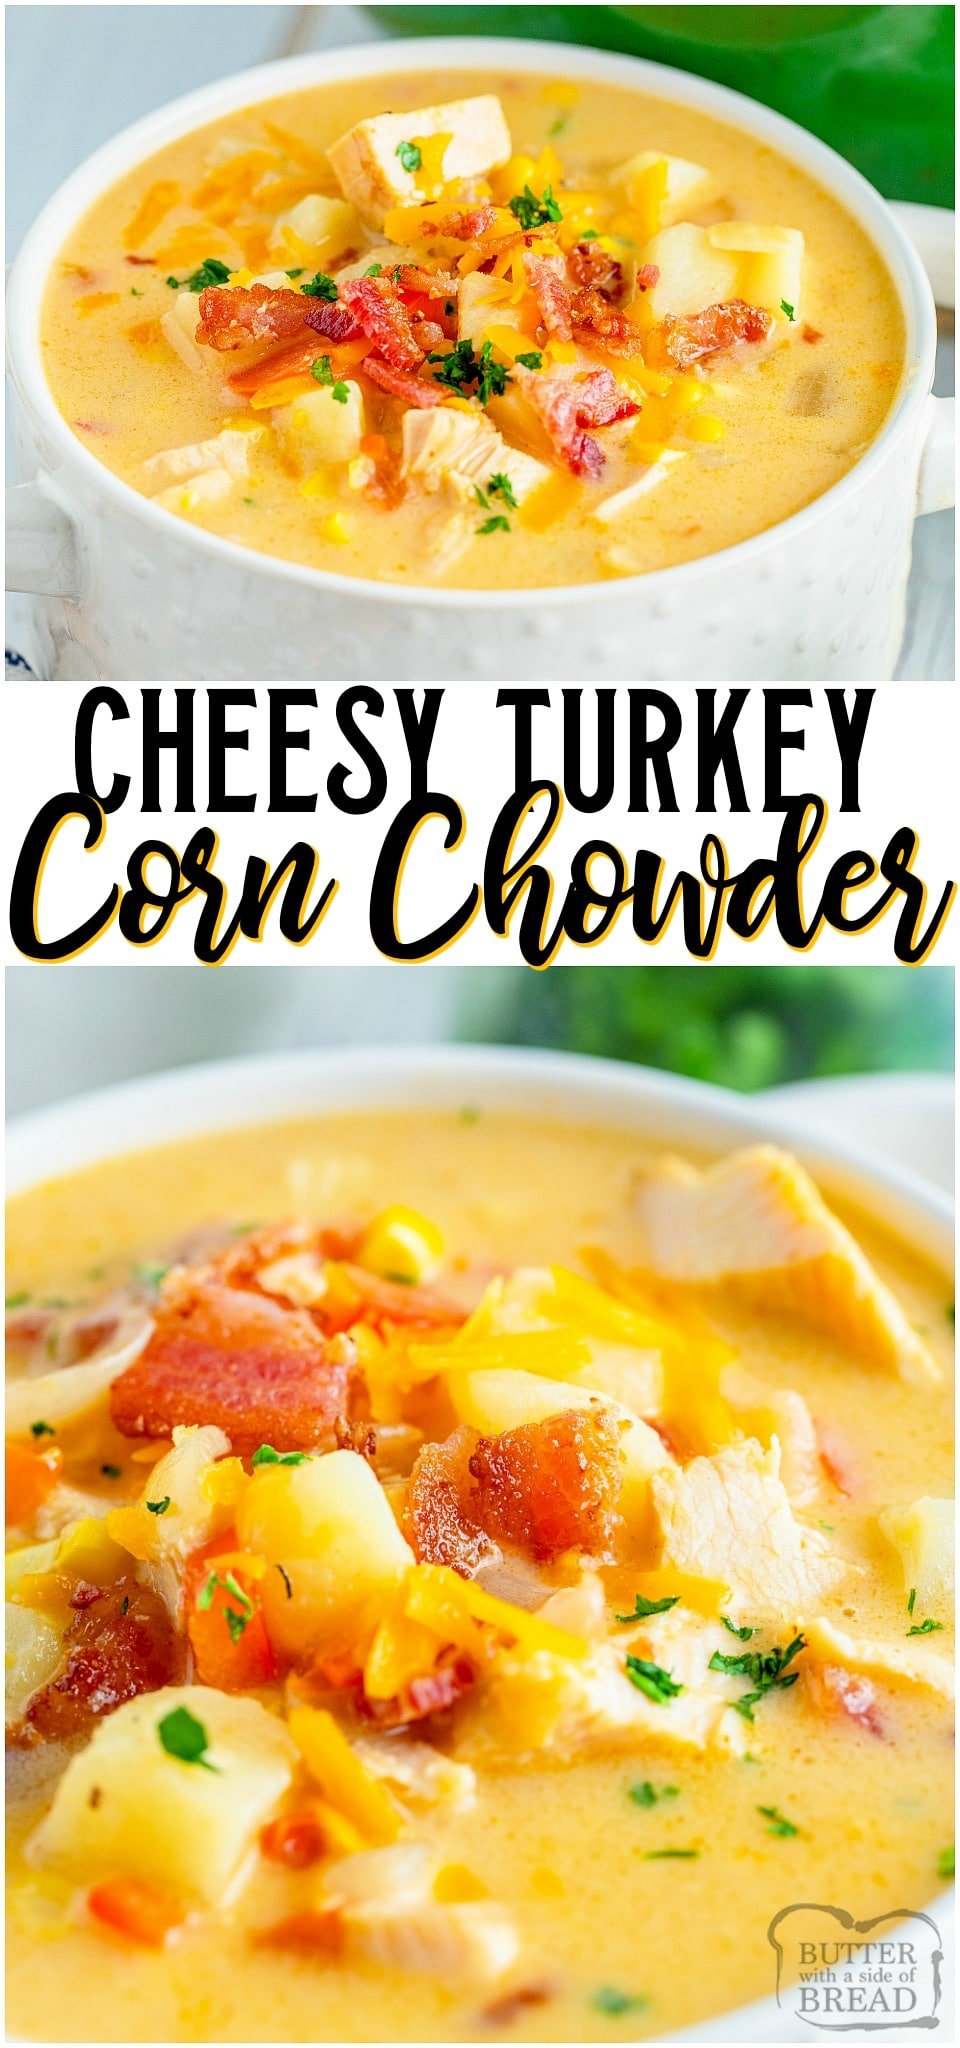 Leftover Turkey Chowder is a creamy, cheesy soup recipe made with leftover turkey, bacon, corn, and potatoes! Easy homemade corn chowder soup with bright, rich flavor for the perfect comfort food.